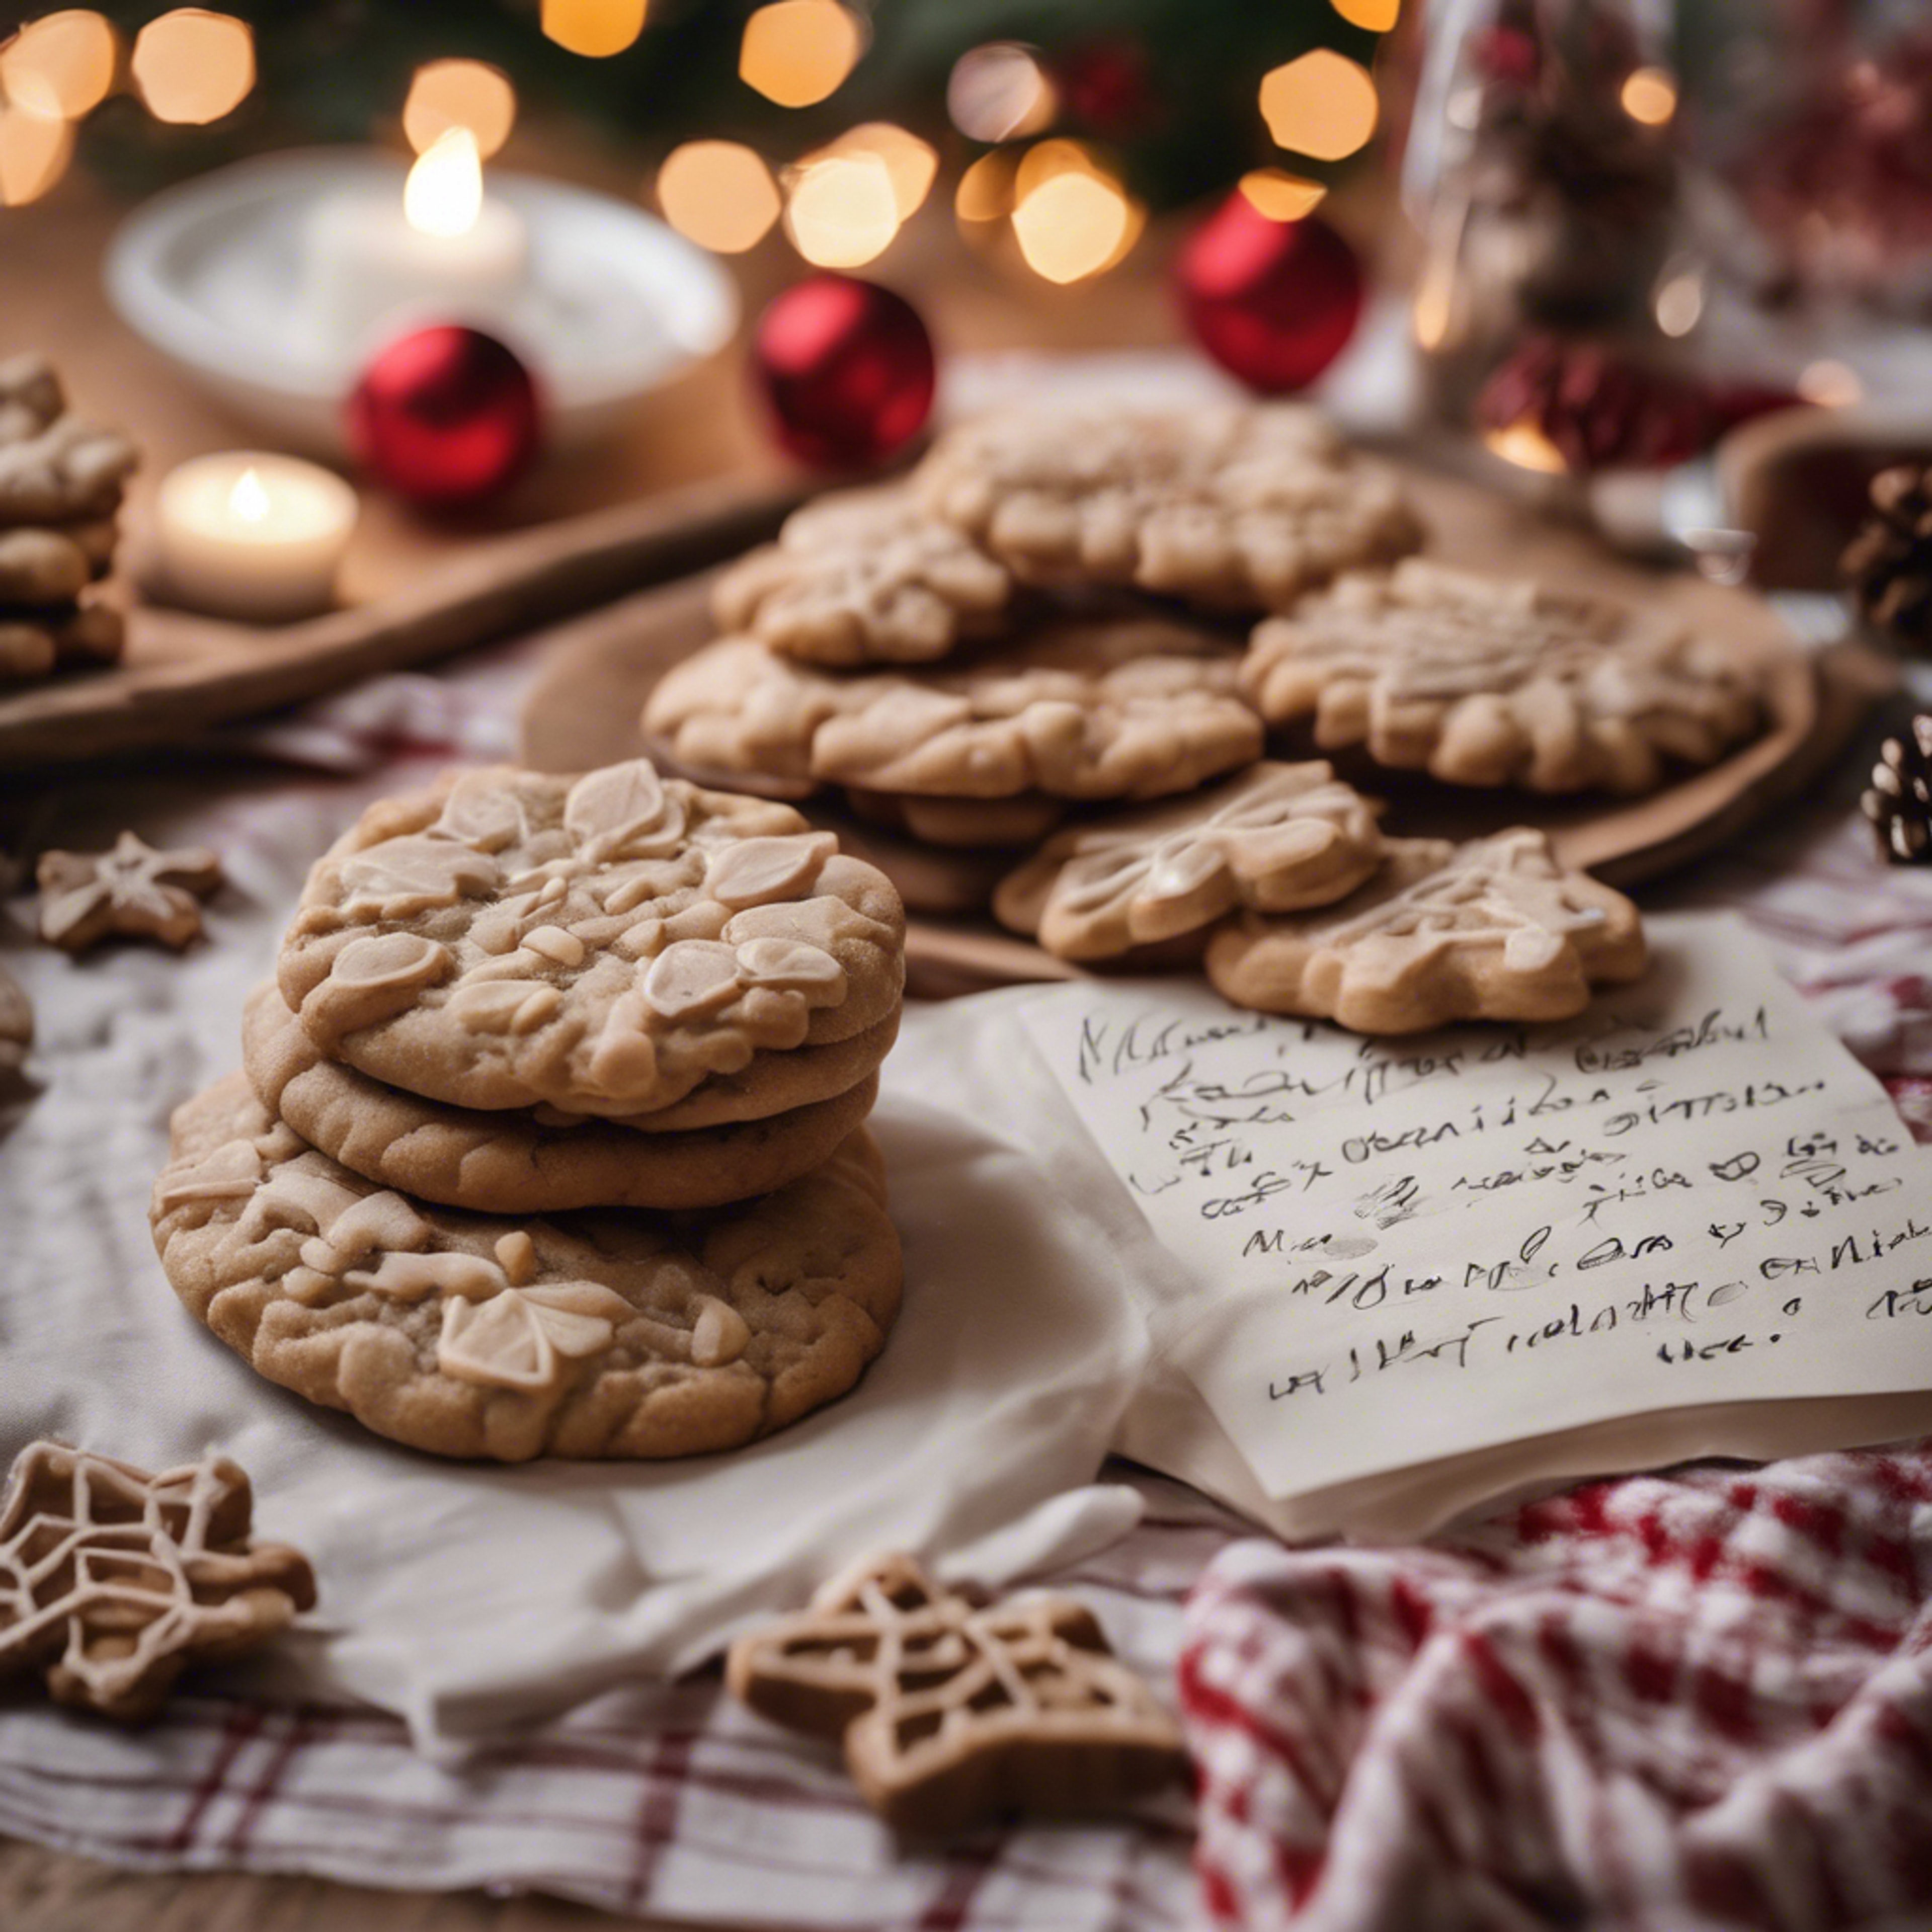 A spread of cozy, homemade Christmas cookies on a festive tablecloth, a glass of milk, and a note to Santa. ផ្ទាំង​រូបភាព[2a748ec29b0a47b6b2f7]